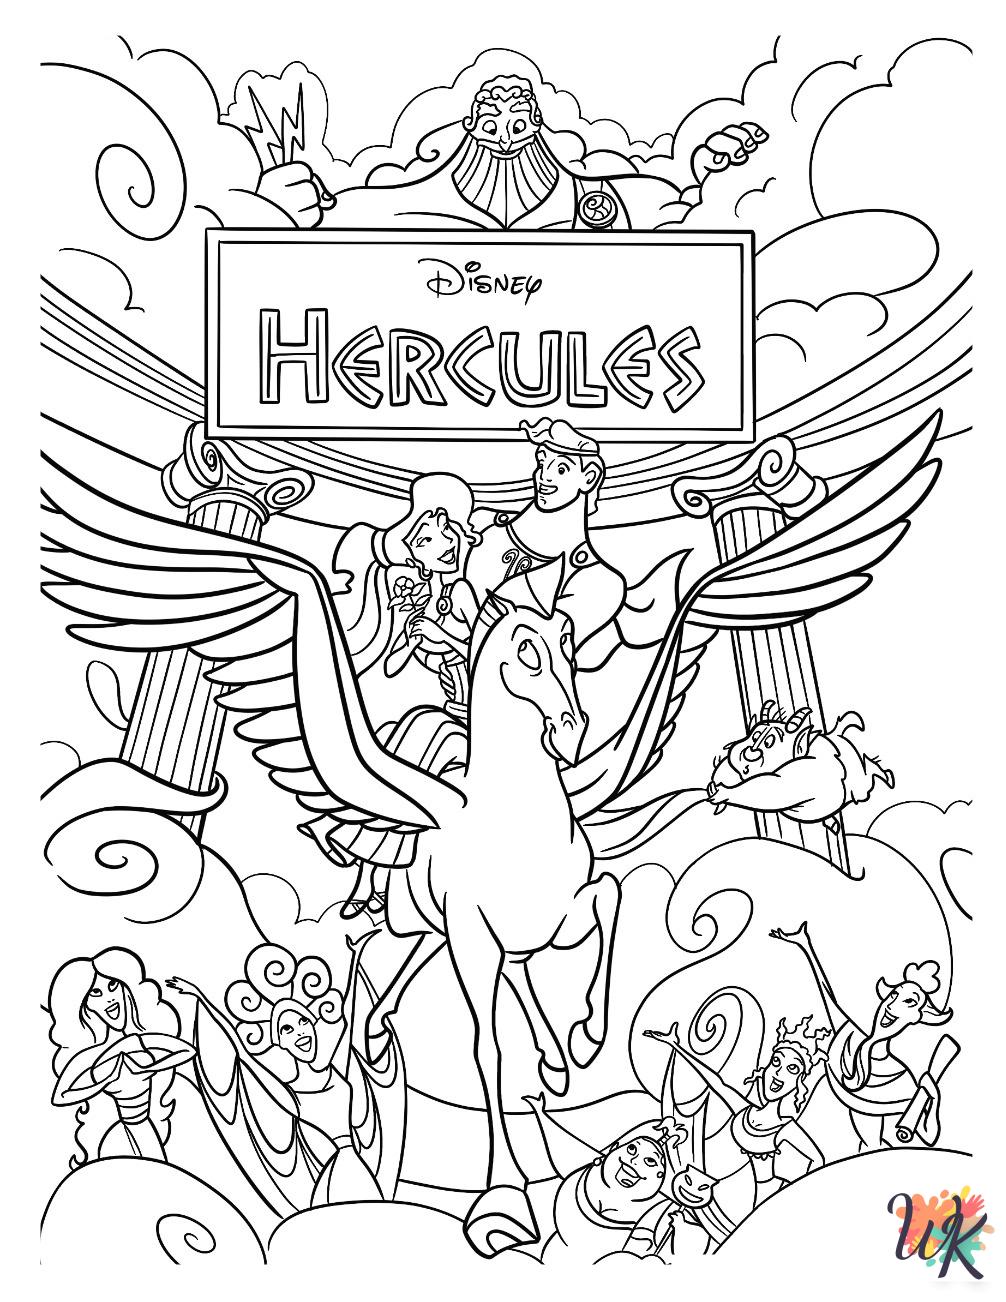 Hercules cards coloring pages